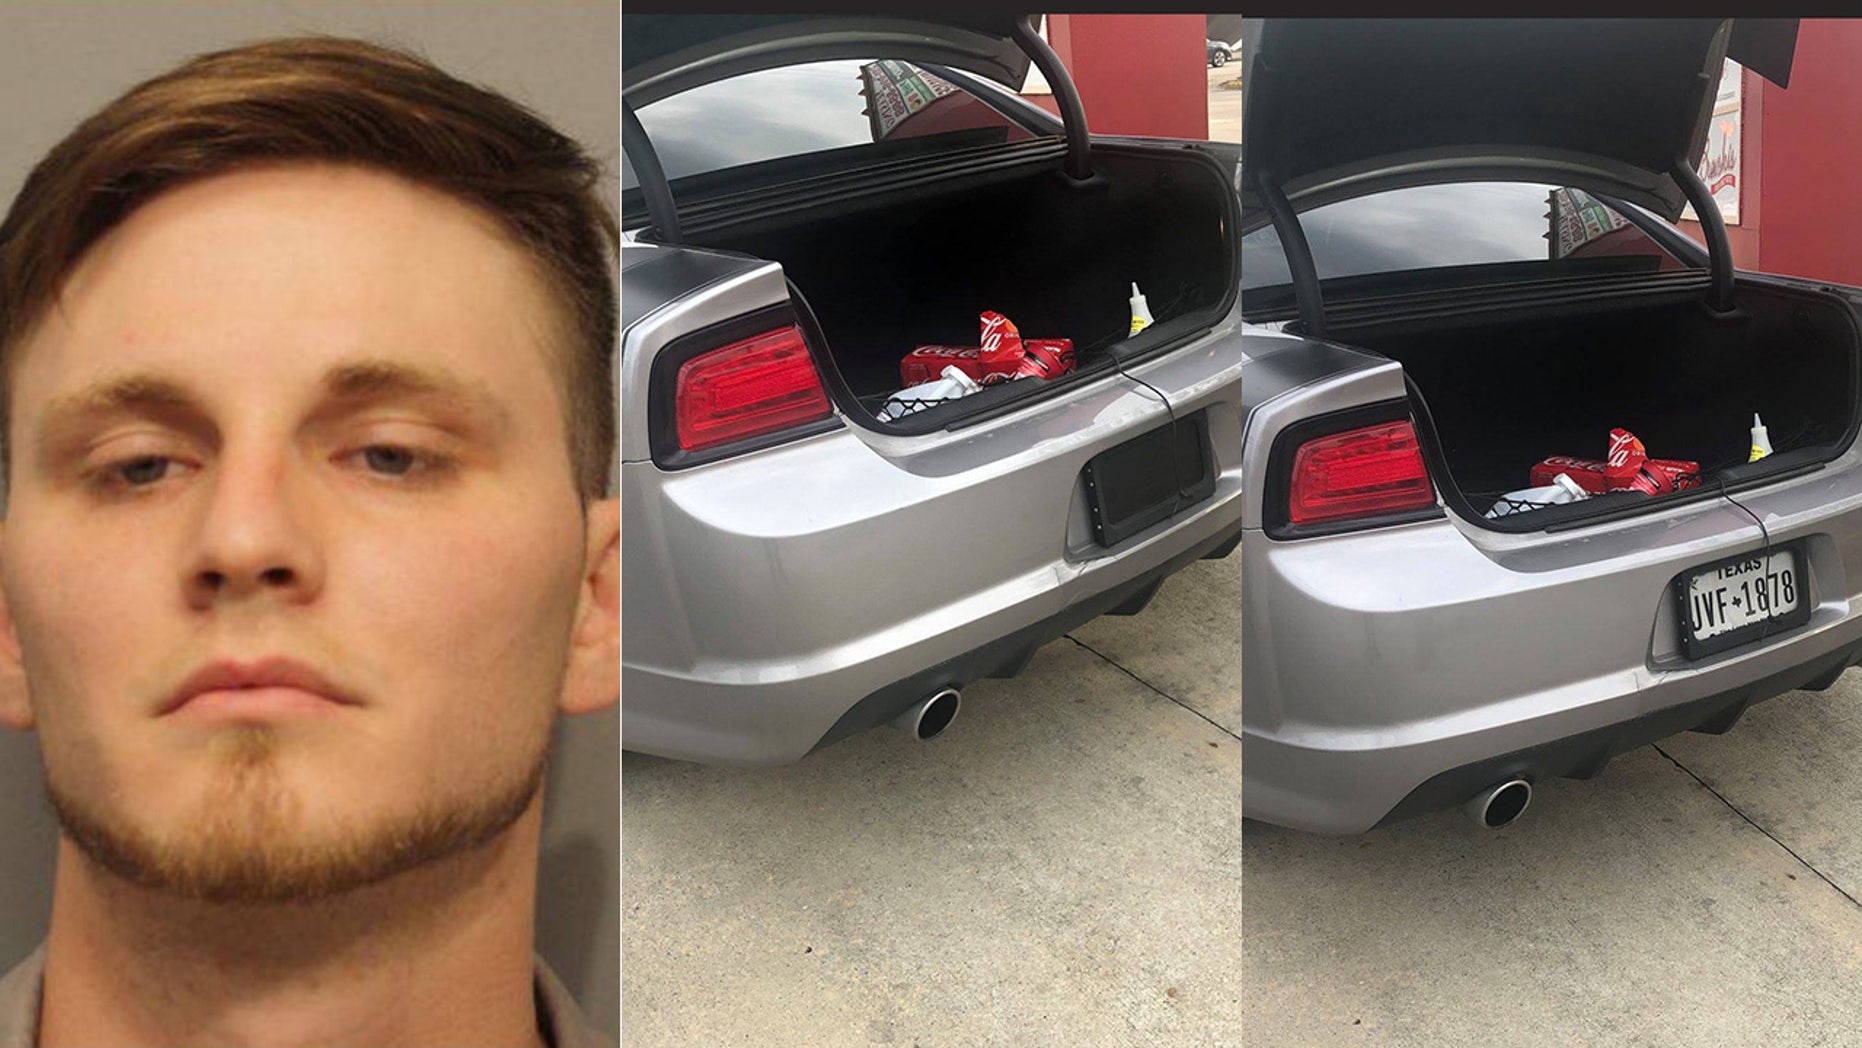 Preston Talbot was arrested Thursday for possessing a pinball illegal license plates. According to the police, the aircraft allowed Talbot to avoid paying close to $ 5,500 in tolls on Houston's highways.